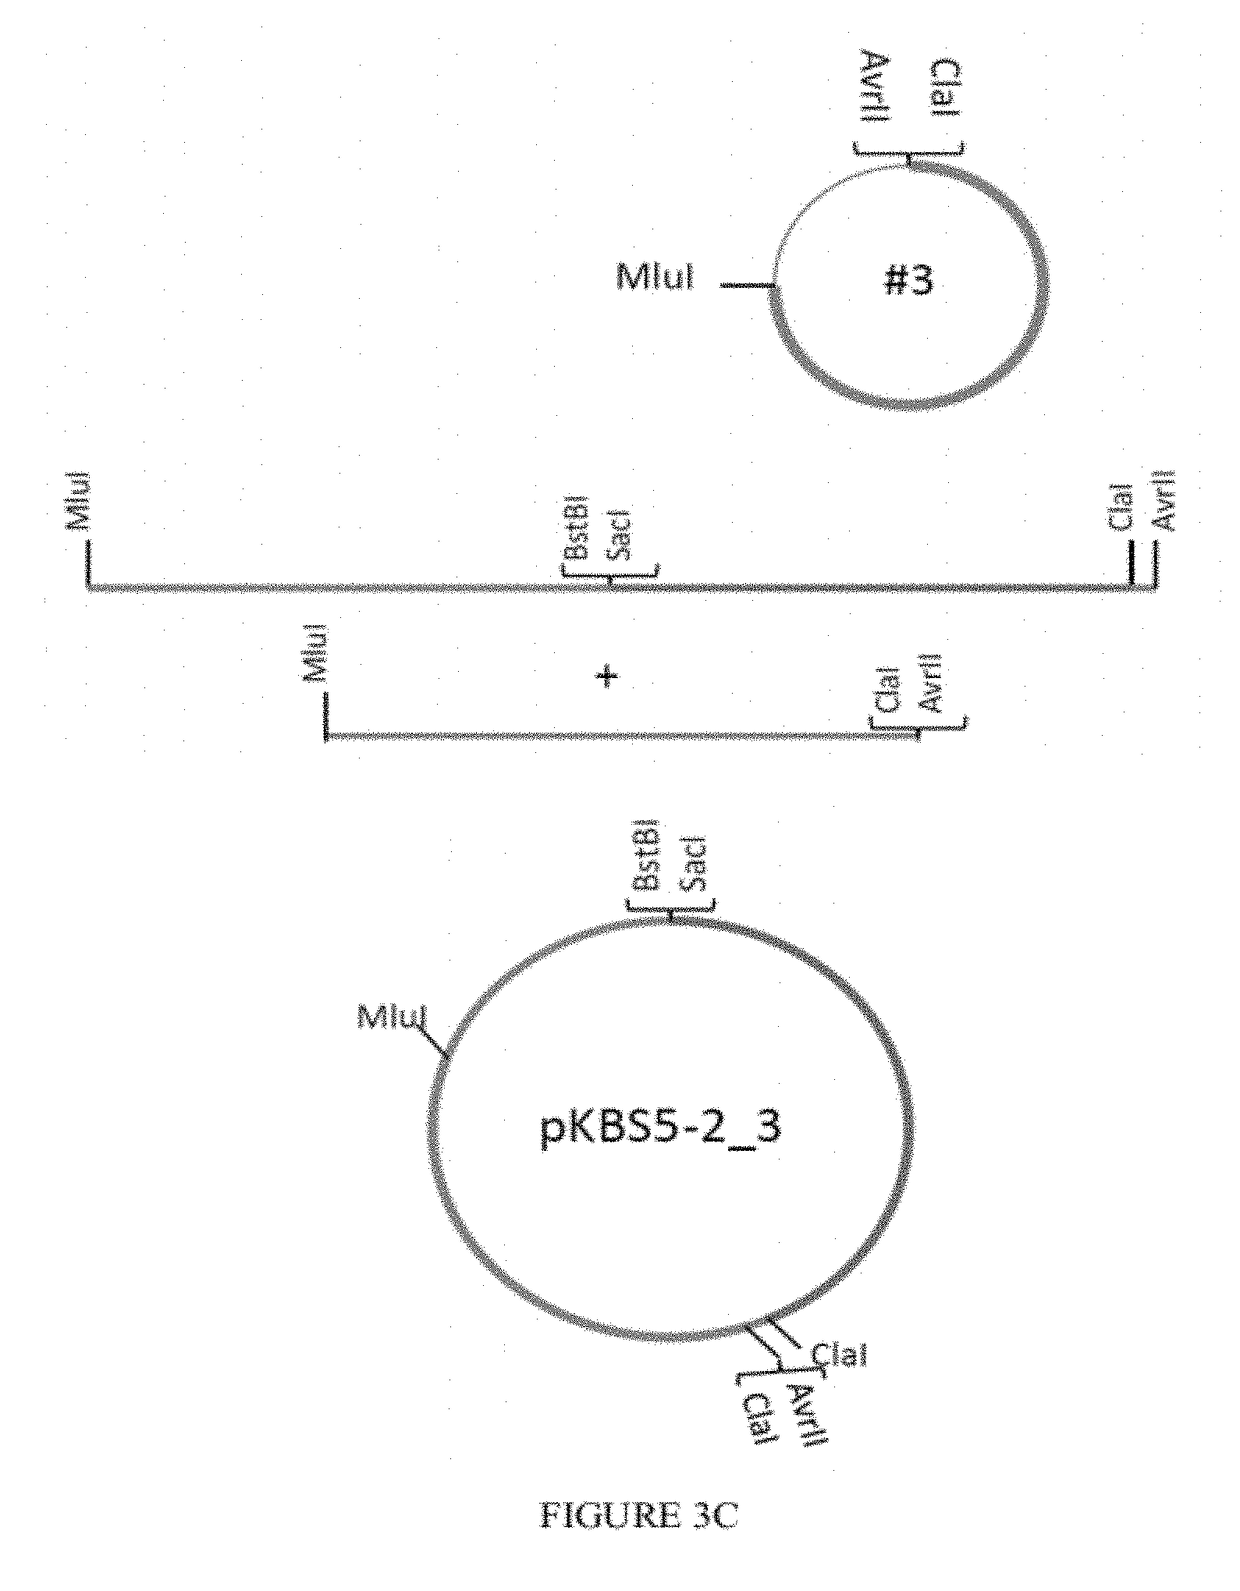 Respiratory syncytial virus expression vectors